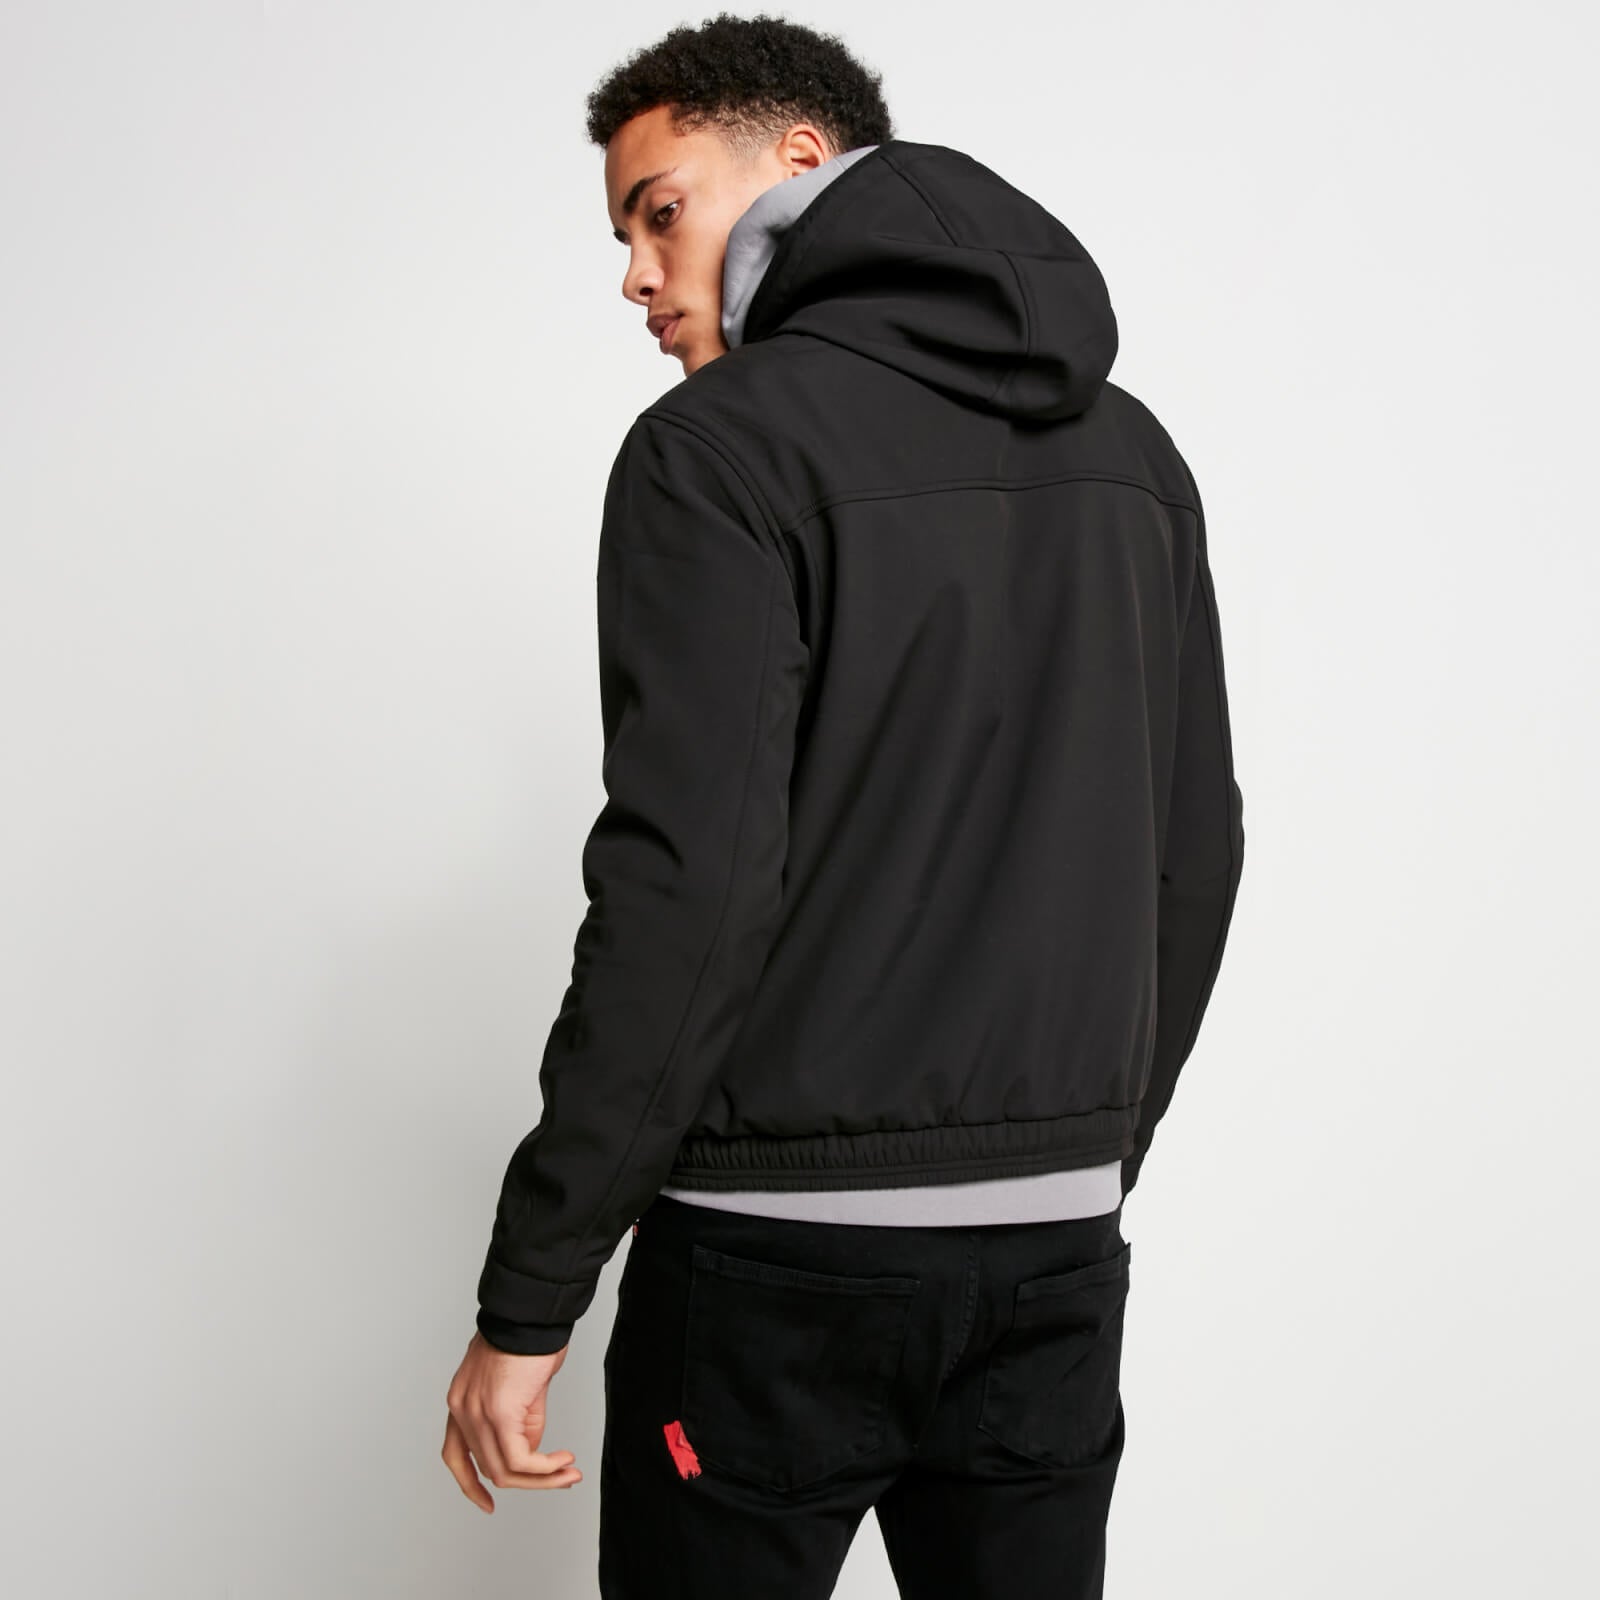 Men's Soft Shell Over The Head Jacket - Black-Back View